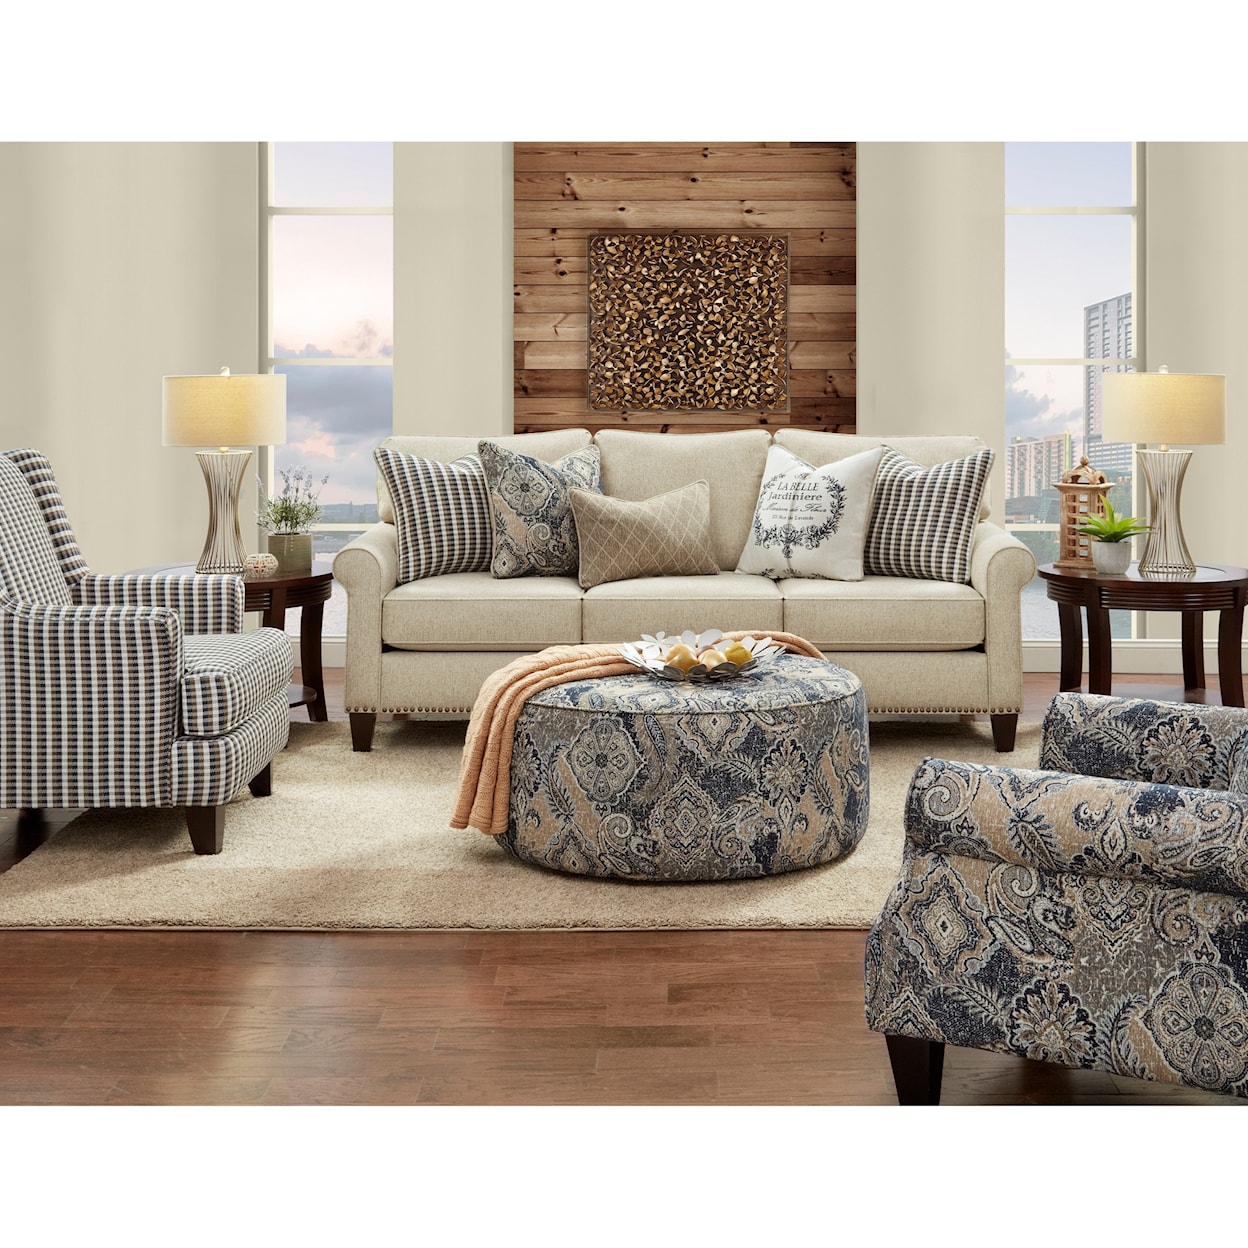 Fusion Furniture 47-00KP TRUTH OR DARE SPICE (REVOLUTION) Living Room Group